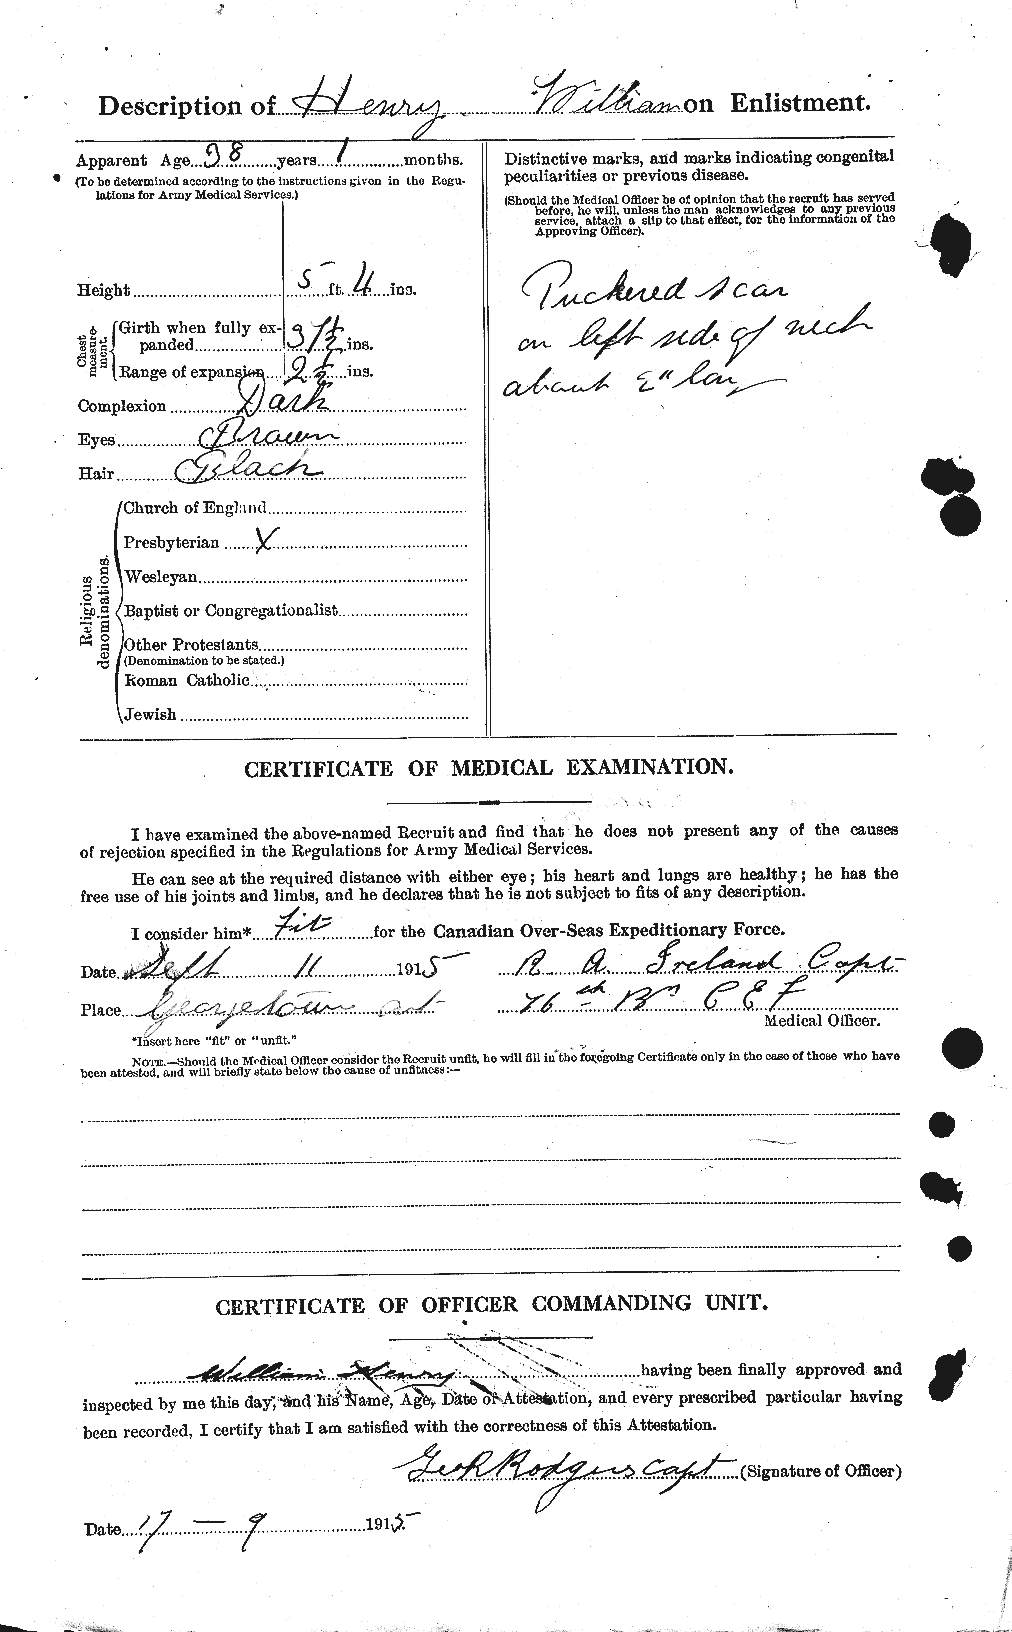 Personnel Records of the First World War - CEF 387778b